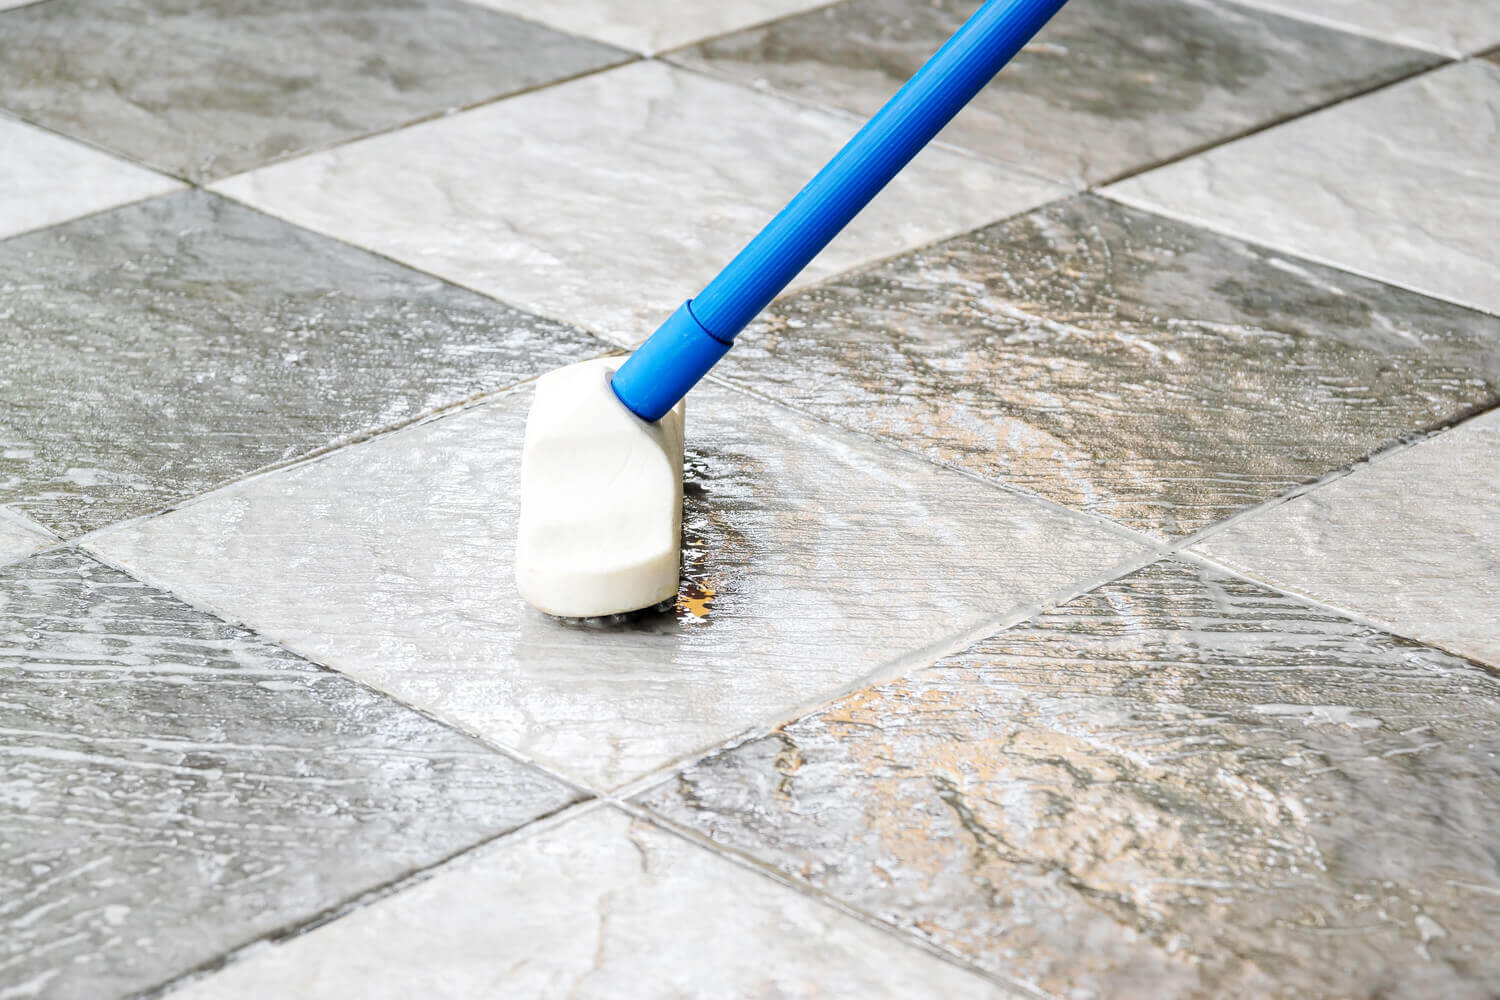 When Do You Need Your Tiled Floor Professionally Cleaned?